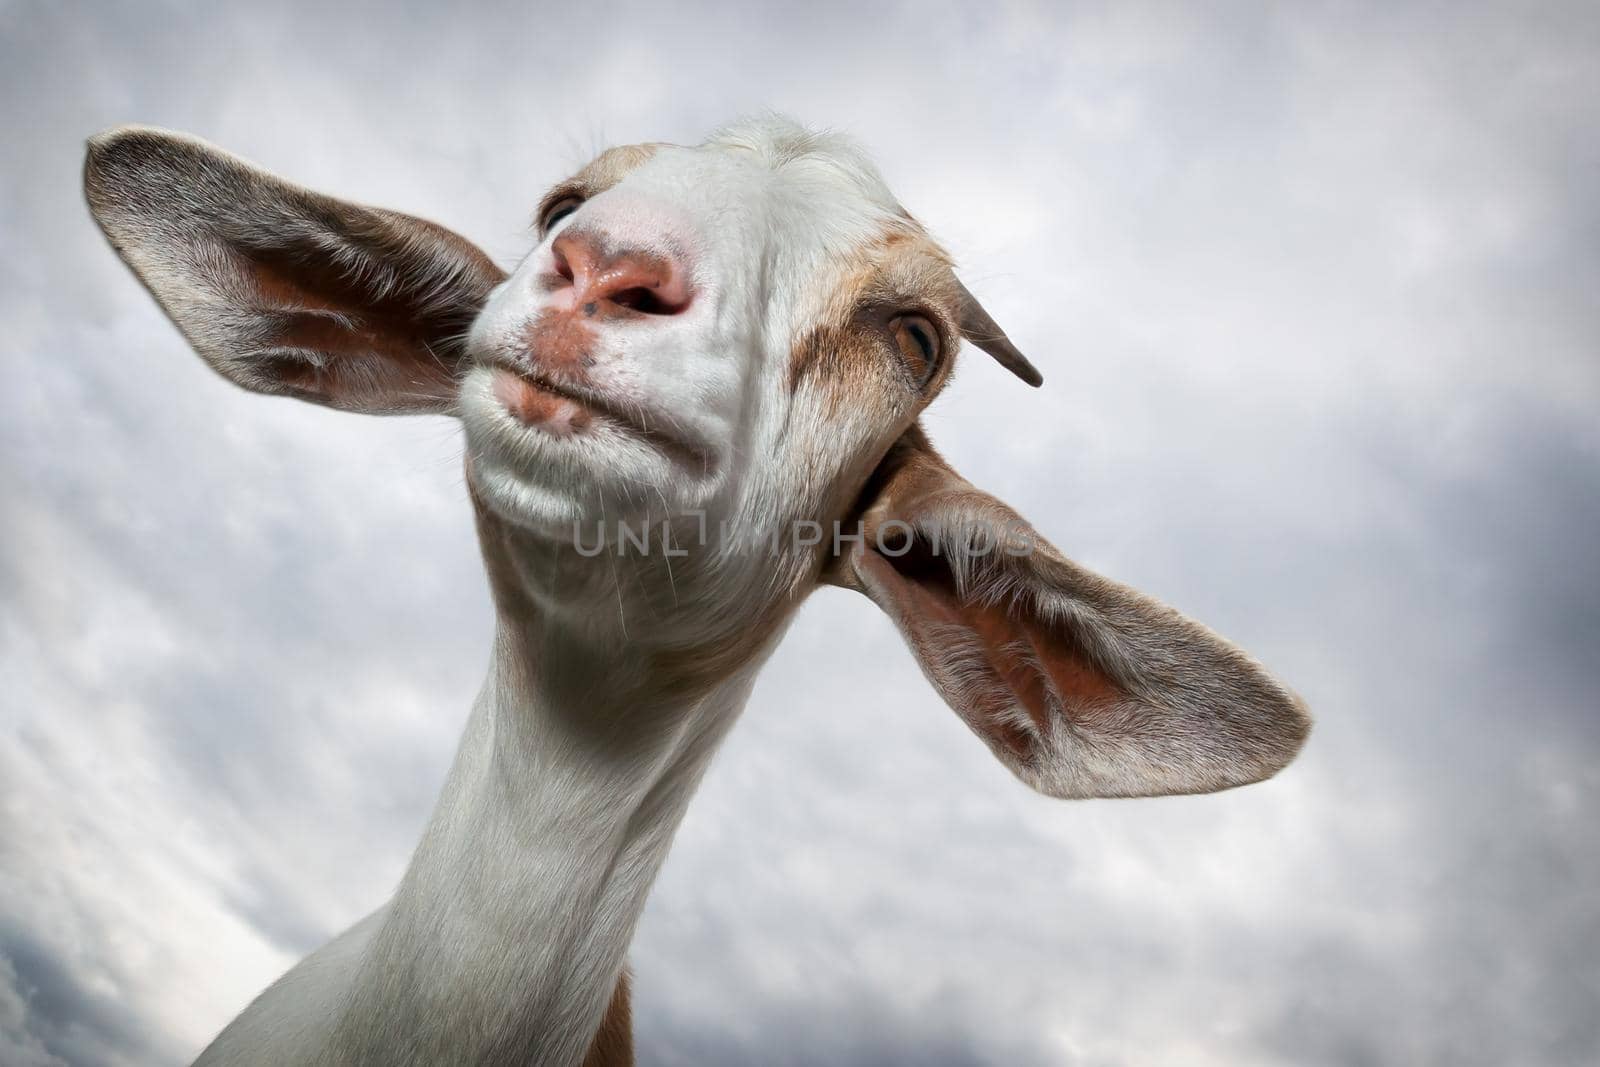 Goat with big ears by Lincikas